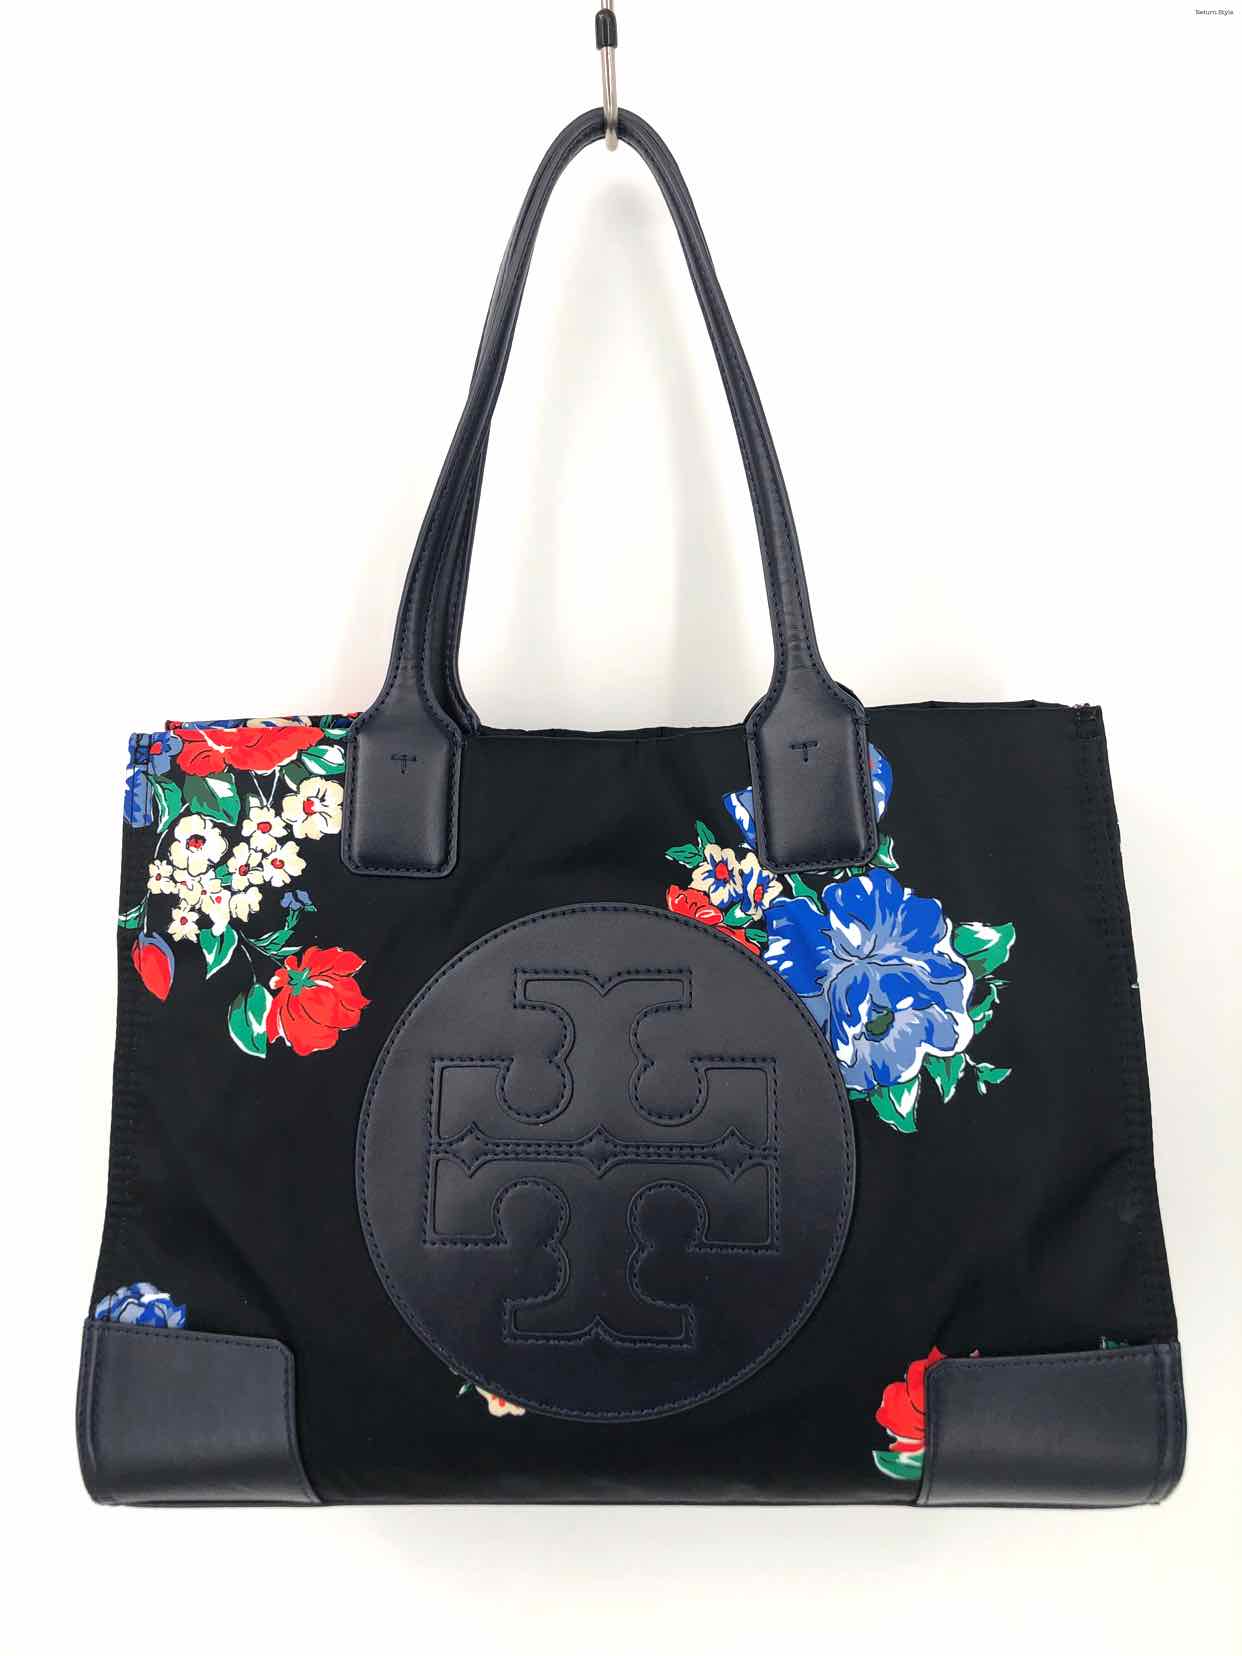 TORY BURCH Navy Black Multi Nylon & Leather Floral Tote Purse – ReturnStyle